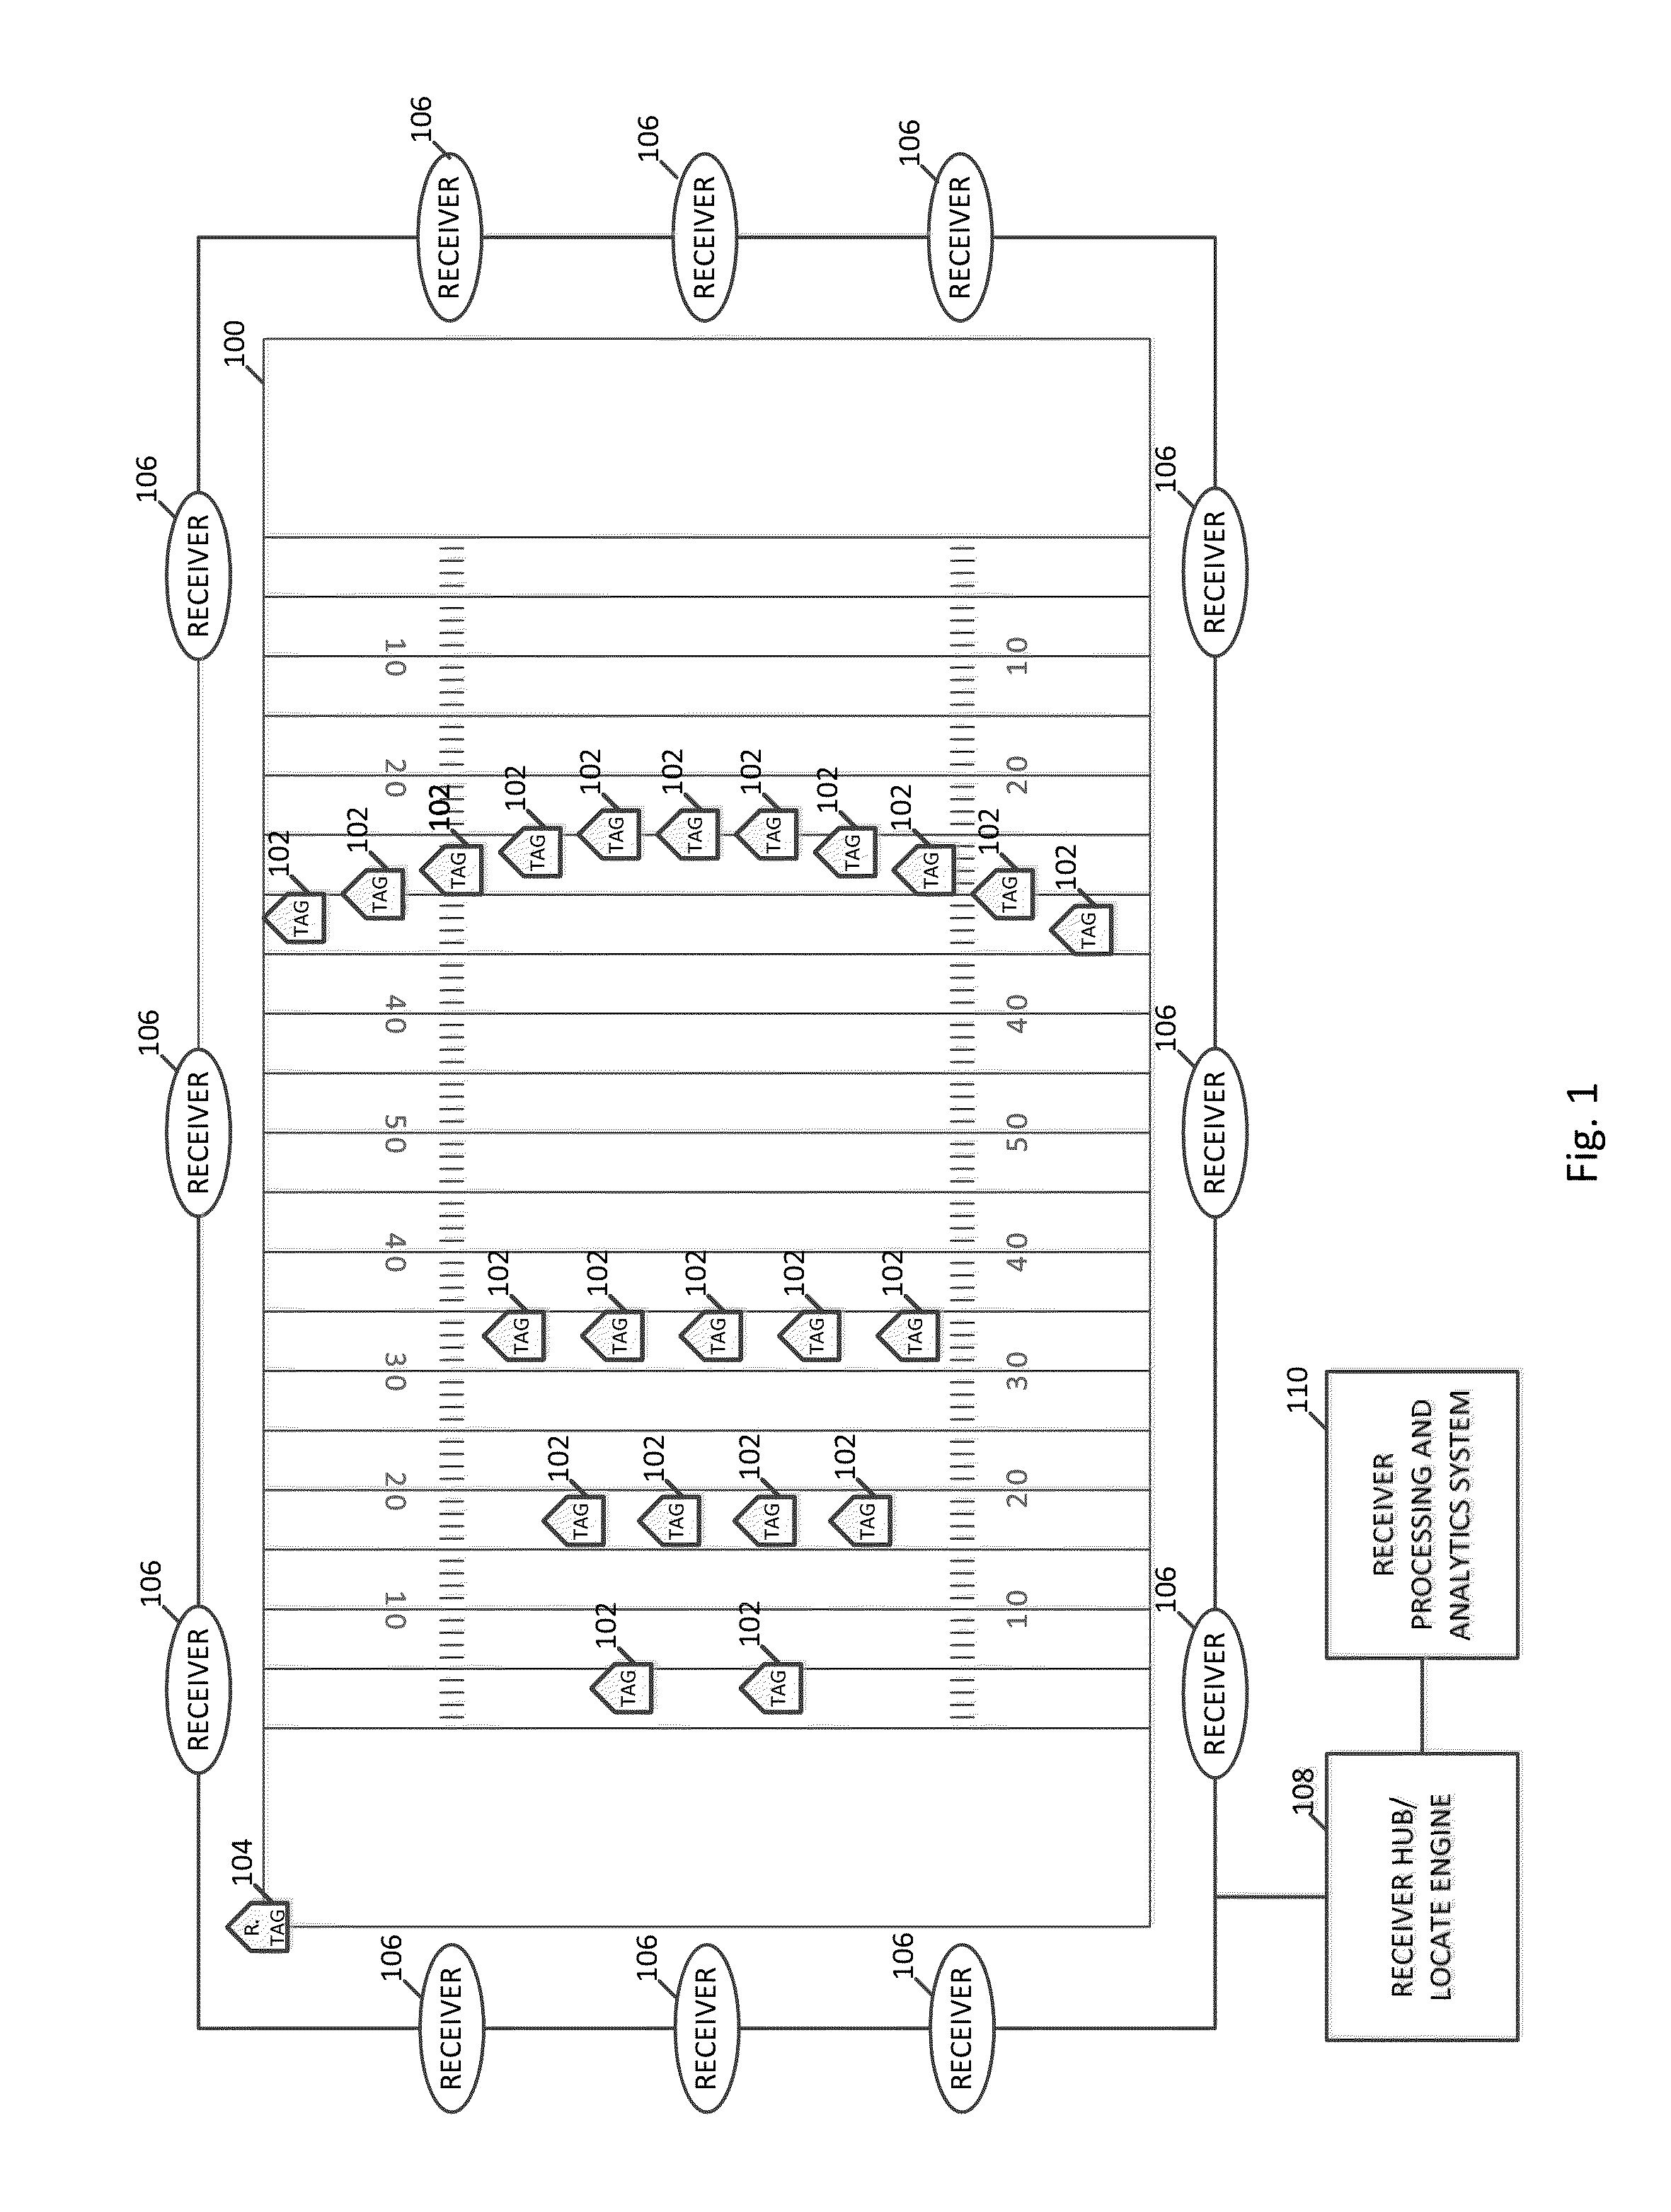 Method, apparatus, and computer program product for tag and individual correlation